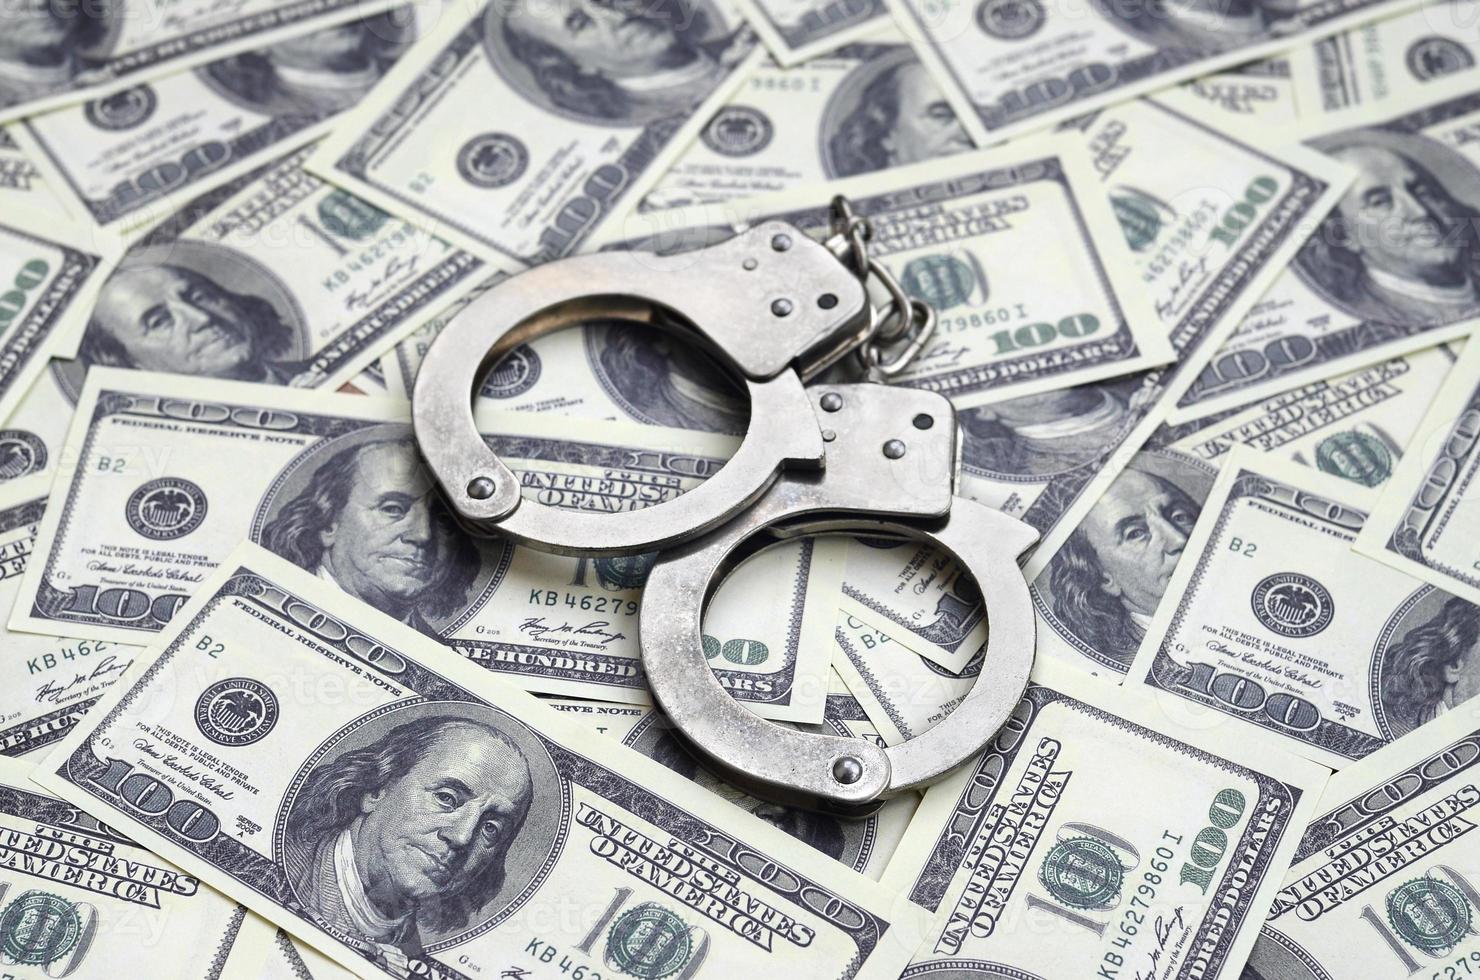 Police handcuffs lie on a lot of dollar bills. The concept of illegal possession of money, illegal transactions with US dollars. Economic Crime photo